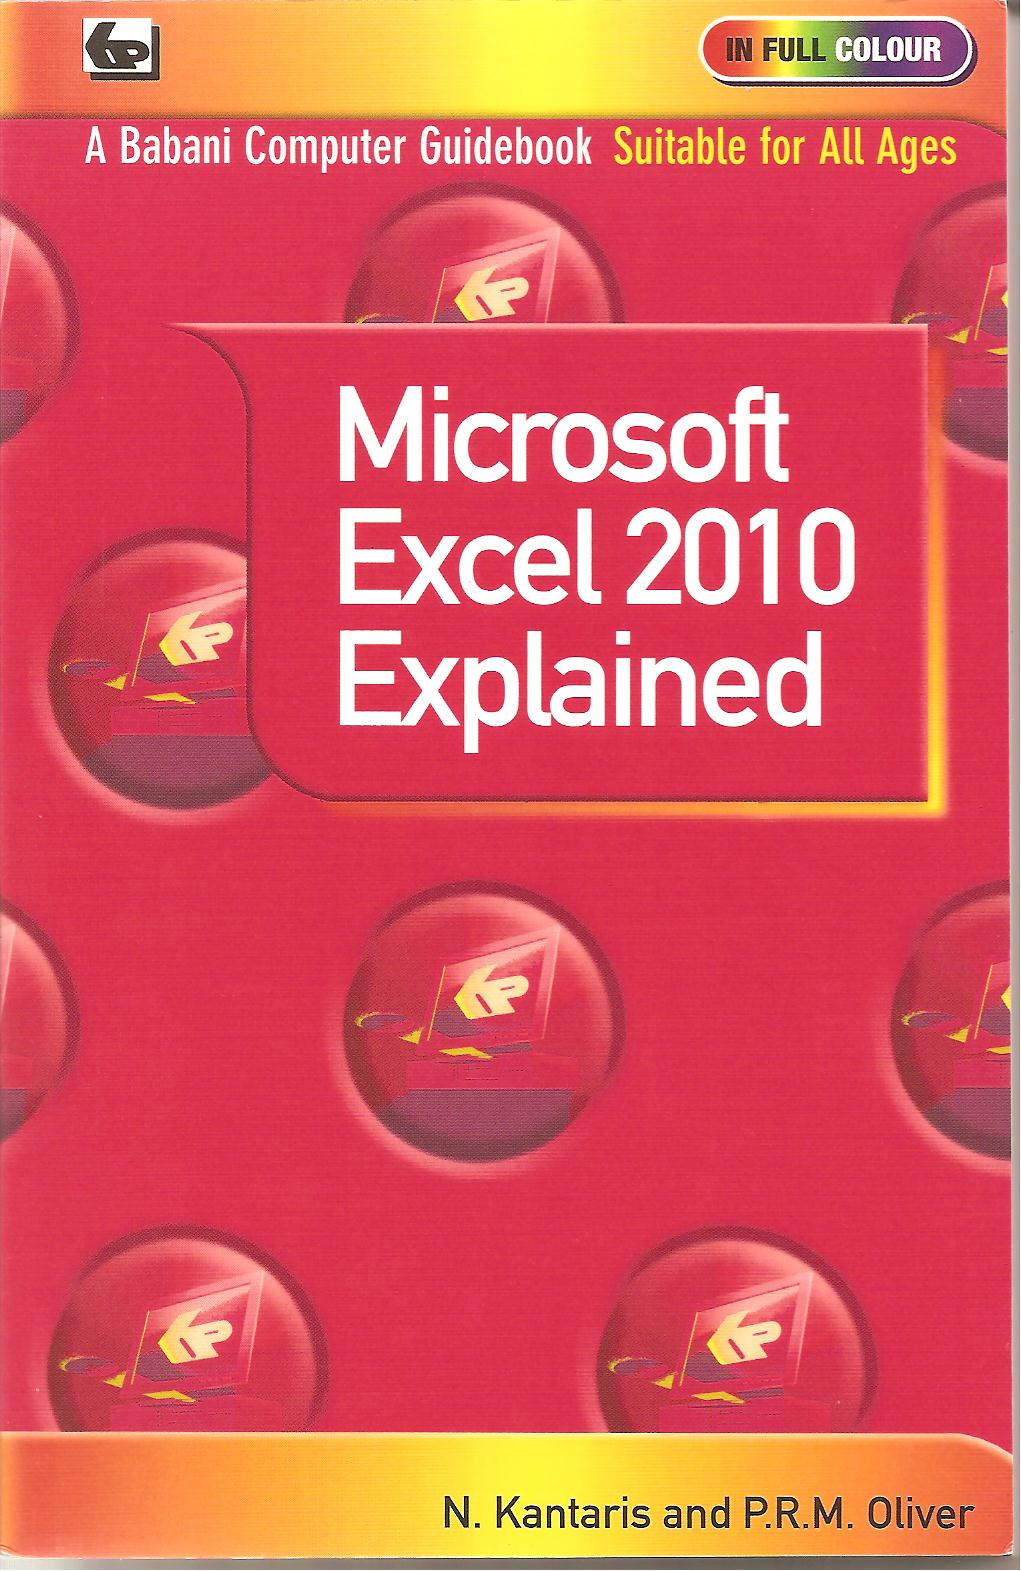 Microsoft Excel 2010 book front